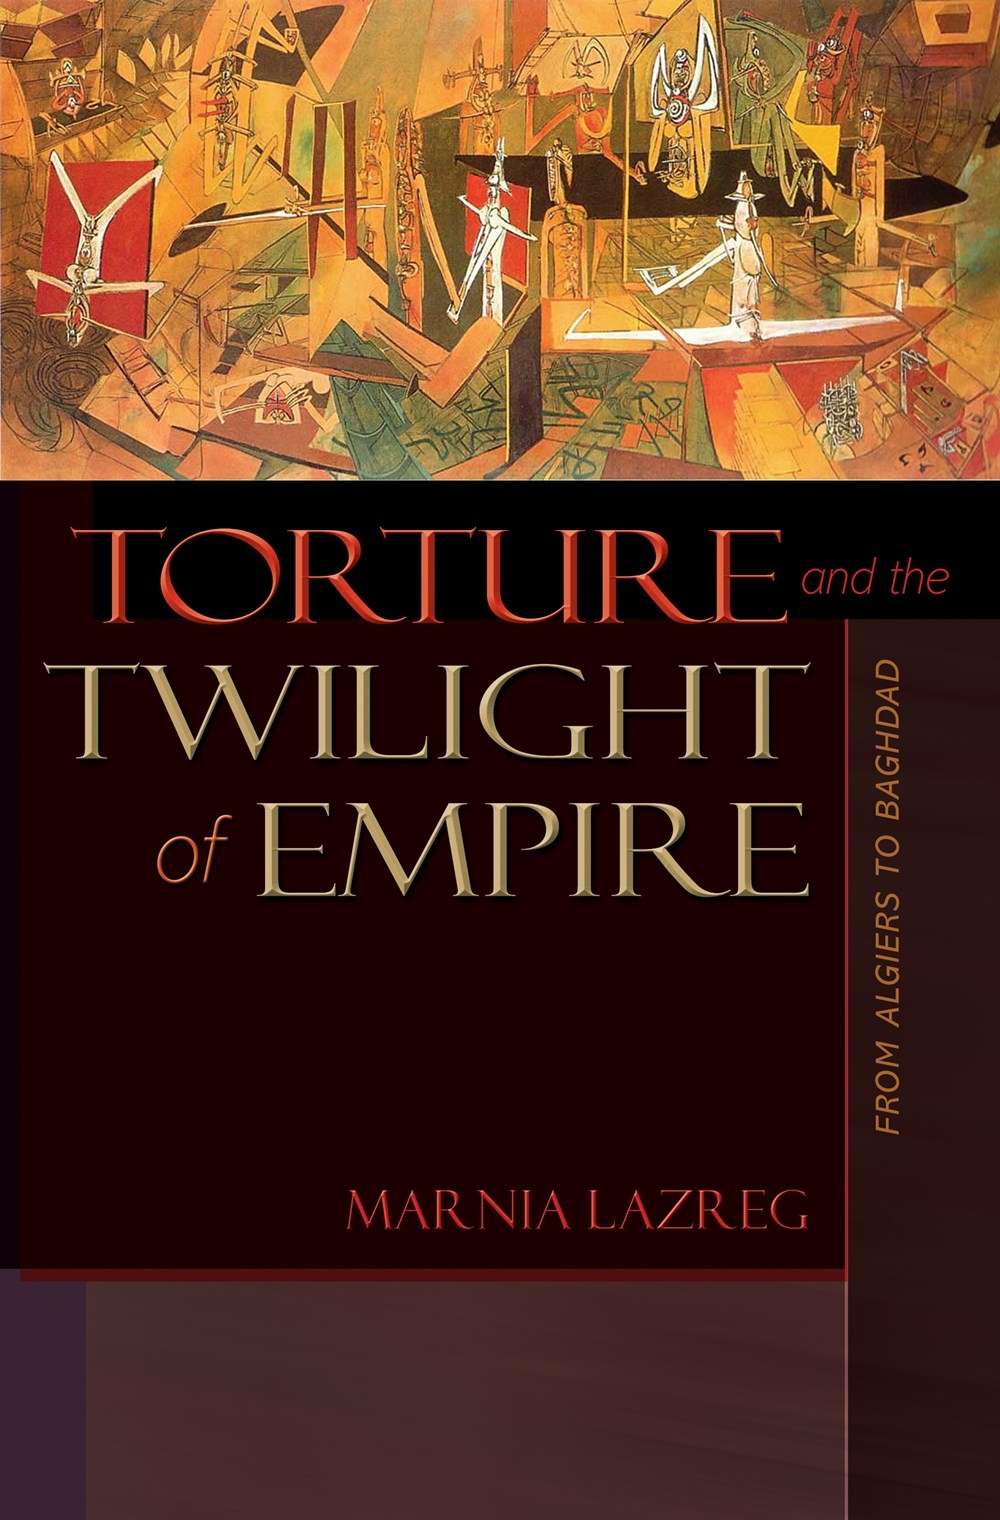 Torture and Twilight of Empire